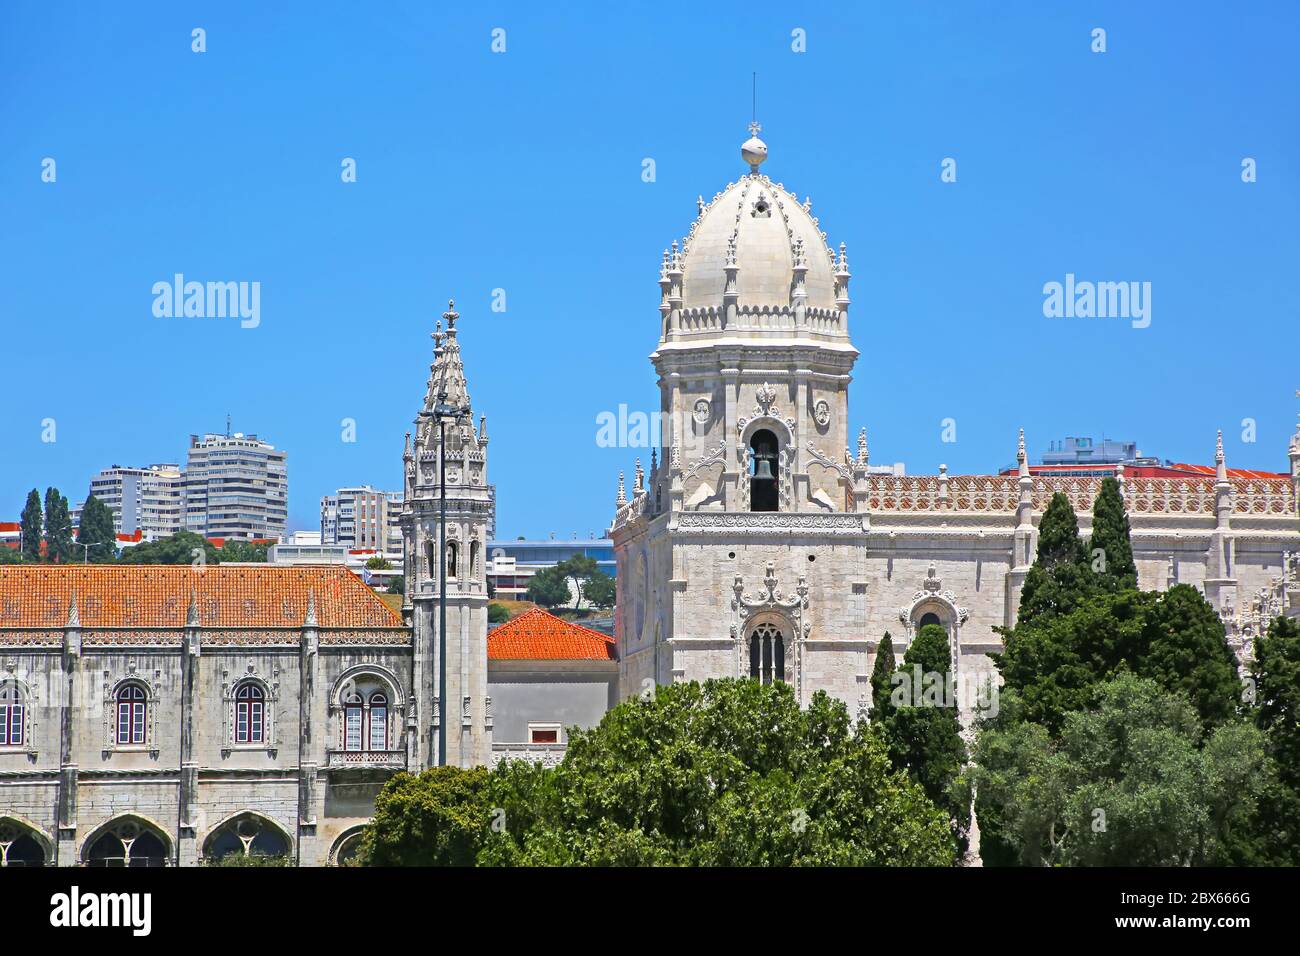 Jeronimos Monastery or Hieronymites Monastery, a former monastery of the Order of Saint Jerome near the Tagus river, parish of Belem, Lisbon, Portugal Stock Photo